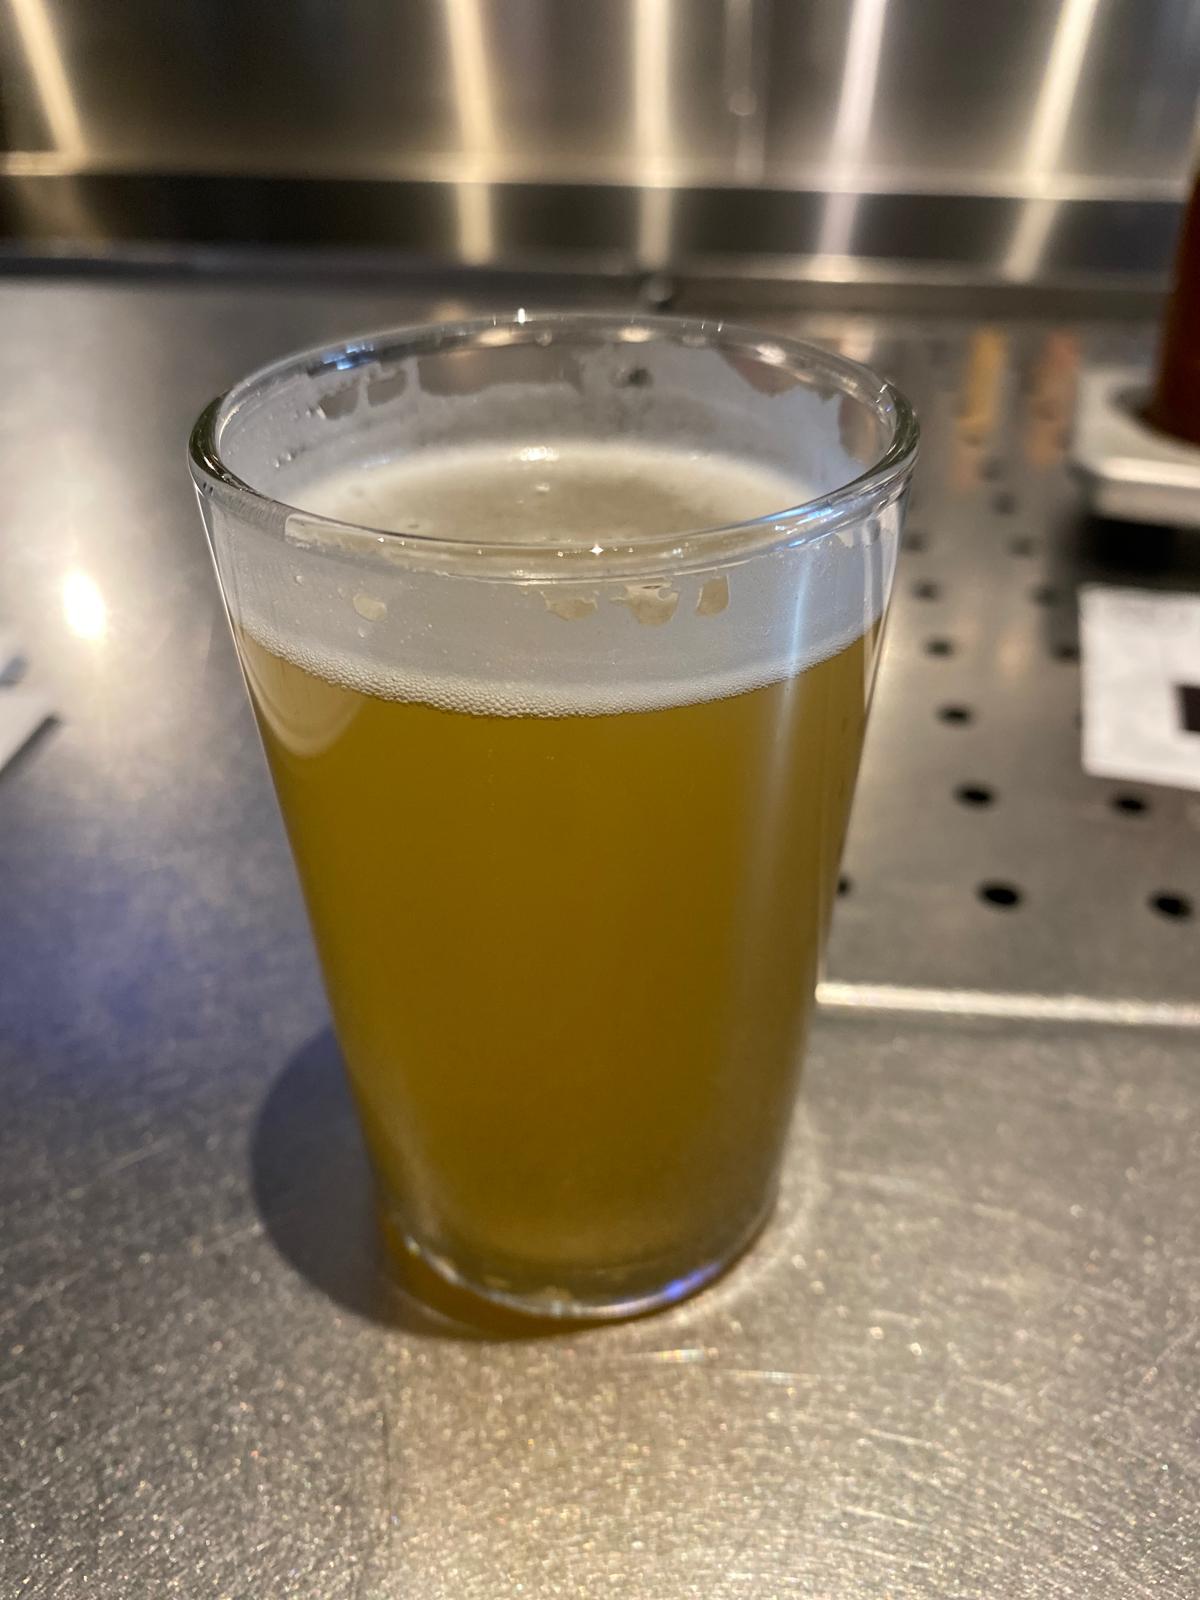 Yard House Cuvée (Collaboration with The Yard House)